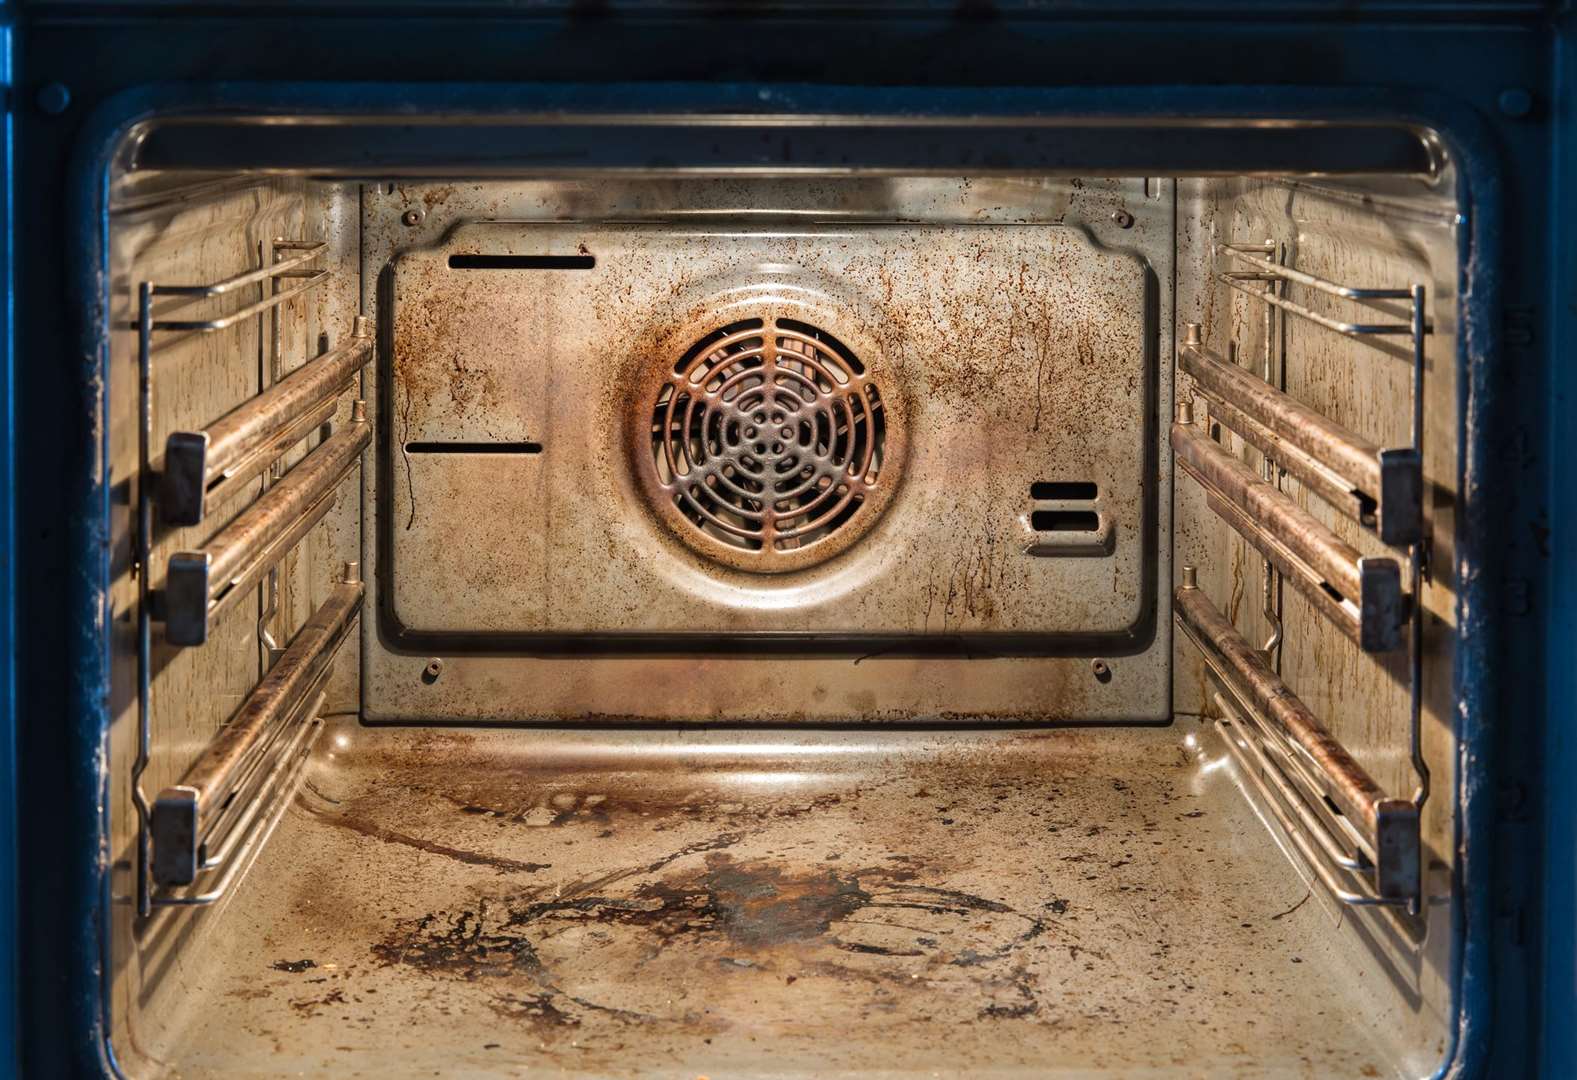 Keeping your oven clean will help distribute the heat more evenly and efficiently. Image: iStock.